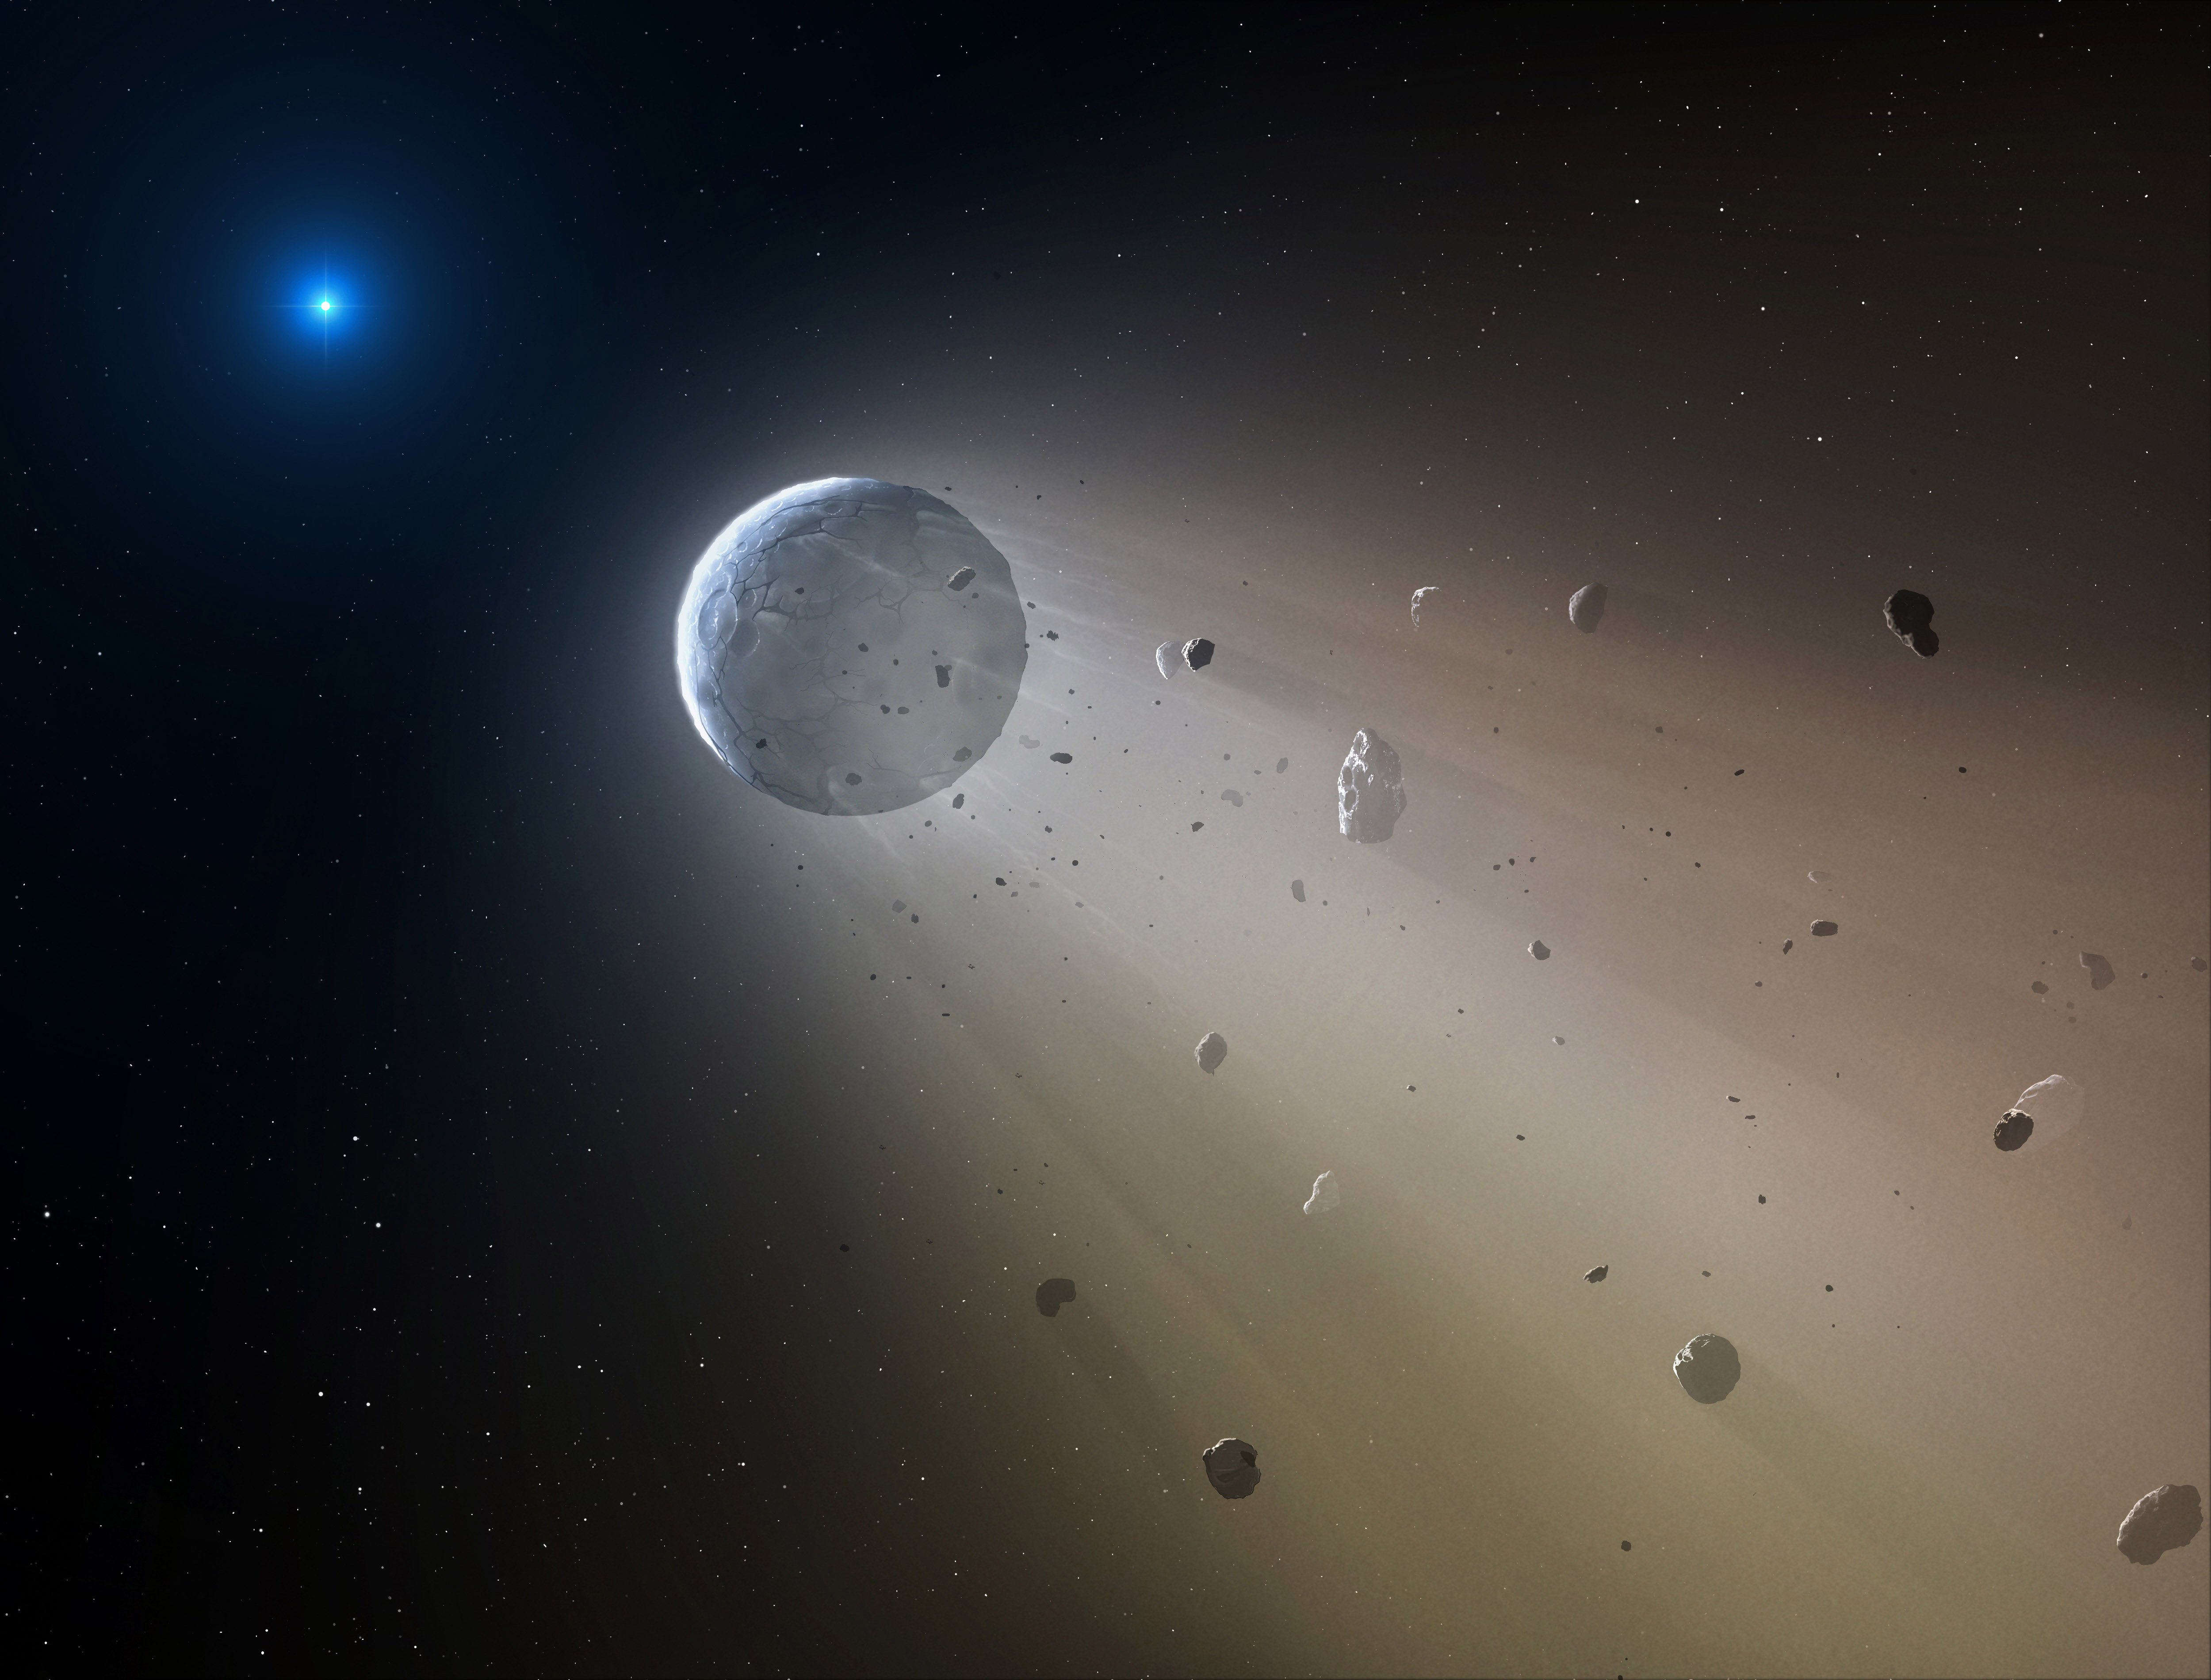 Artist's rendering shows an asteroid slowly disintegrating as it orbits a white dwarf star. Photo: AP